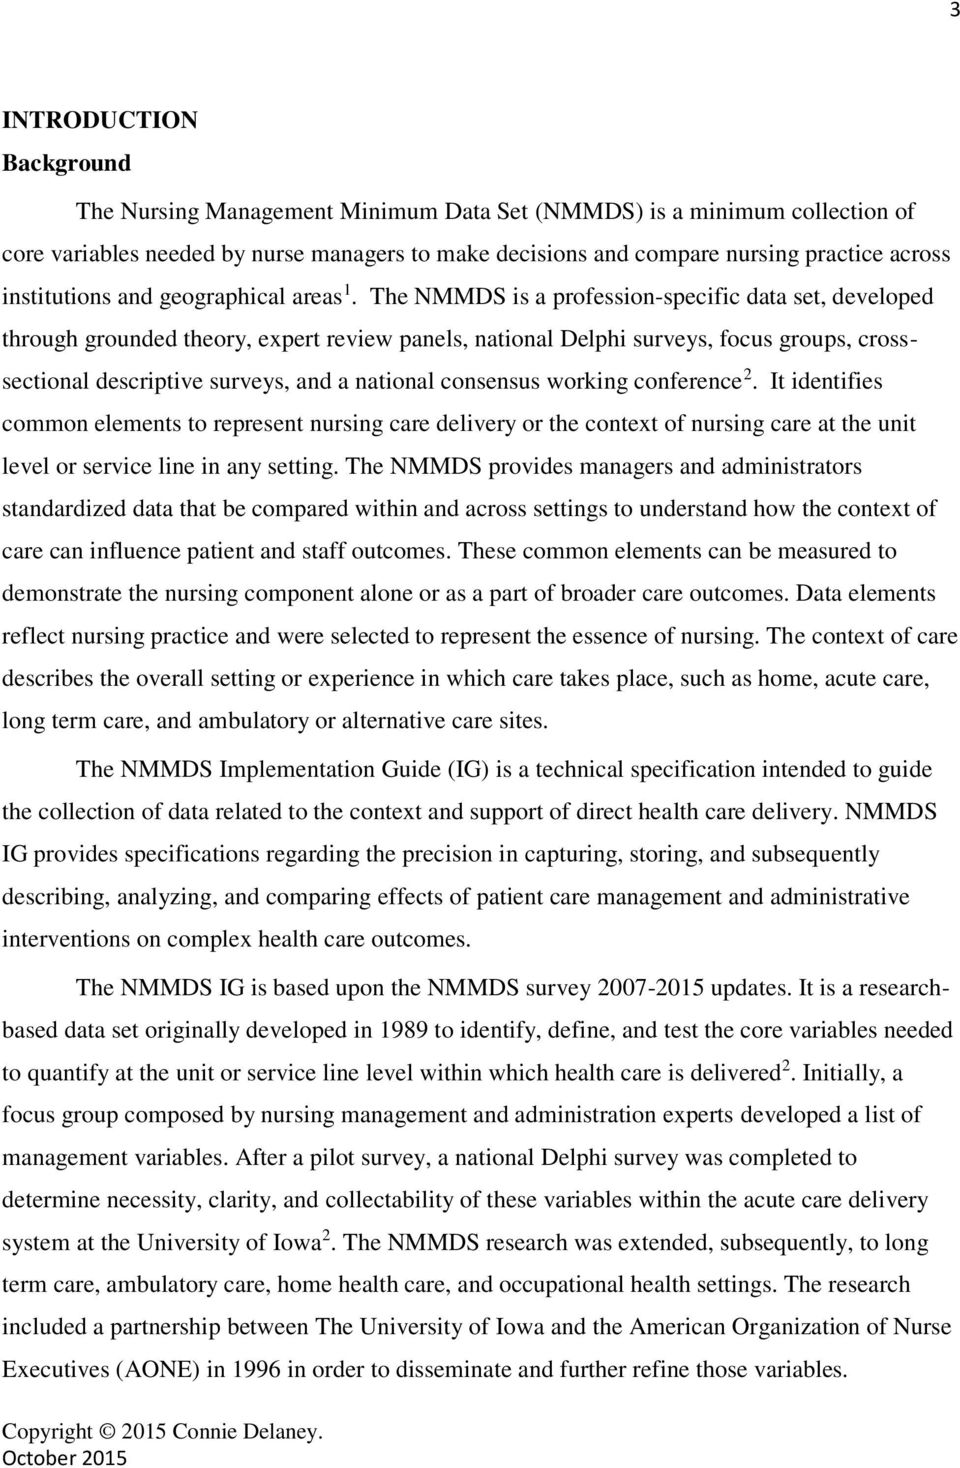 The NMMDS is a profession-specific data set, developed through grounded theory, expert review panels, national Delphi surveys, focus groups, crosssectional descriptive surveys, and a national